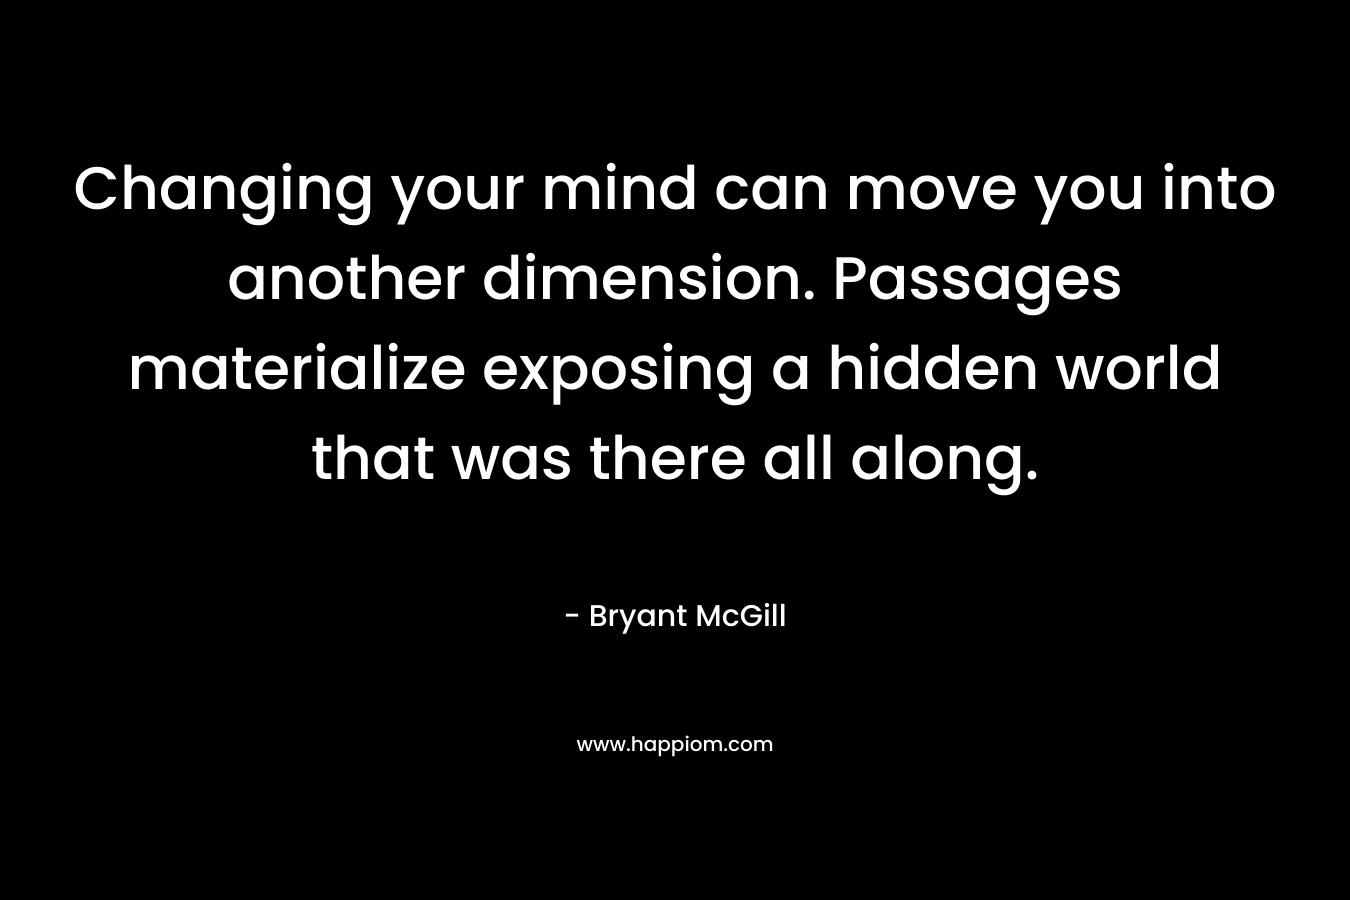 Changing your mind can move you into another dimension. Passages materialize exposing a hidden world that was there all along. – Bryant McGill